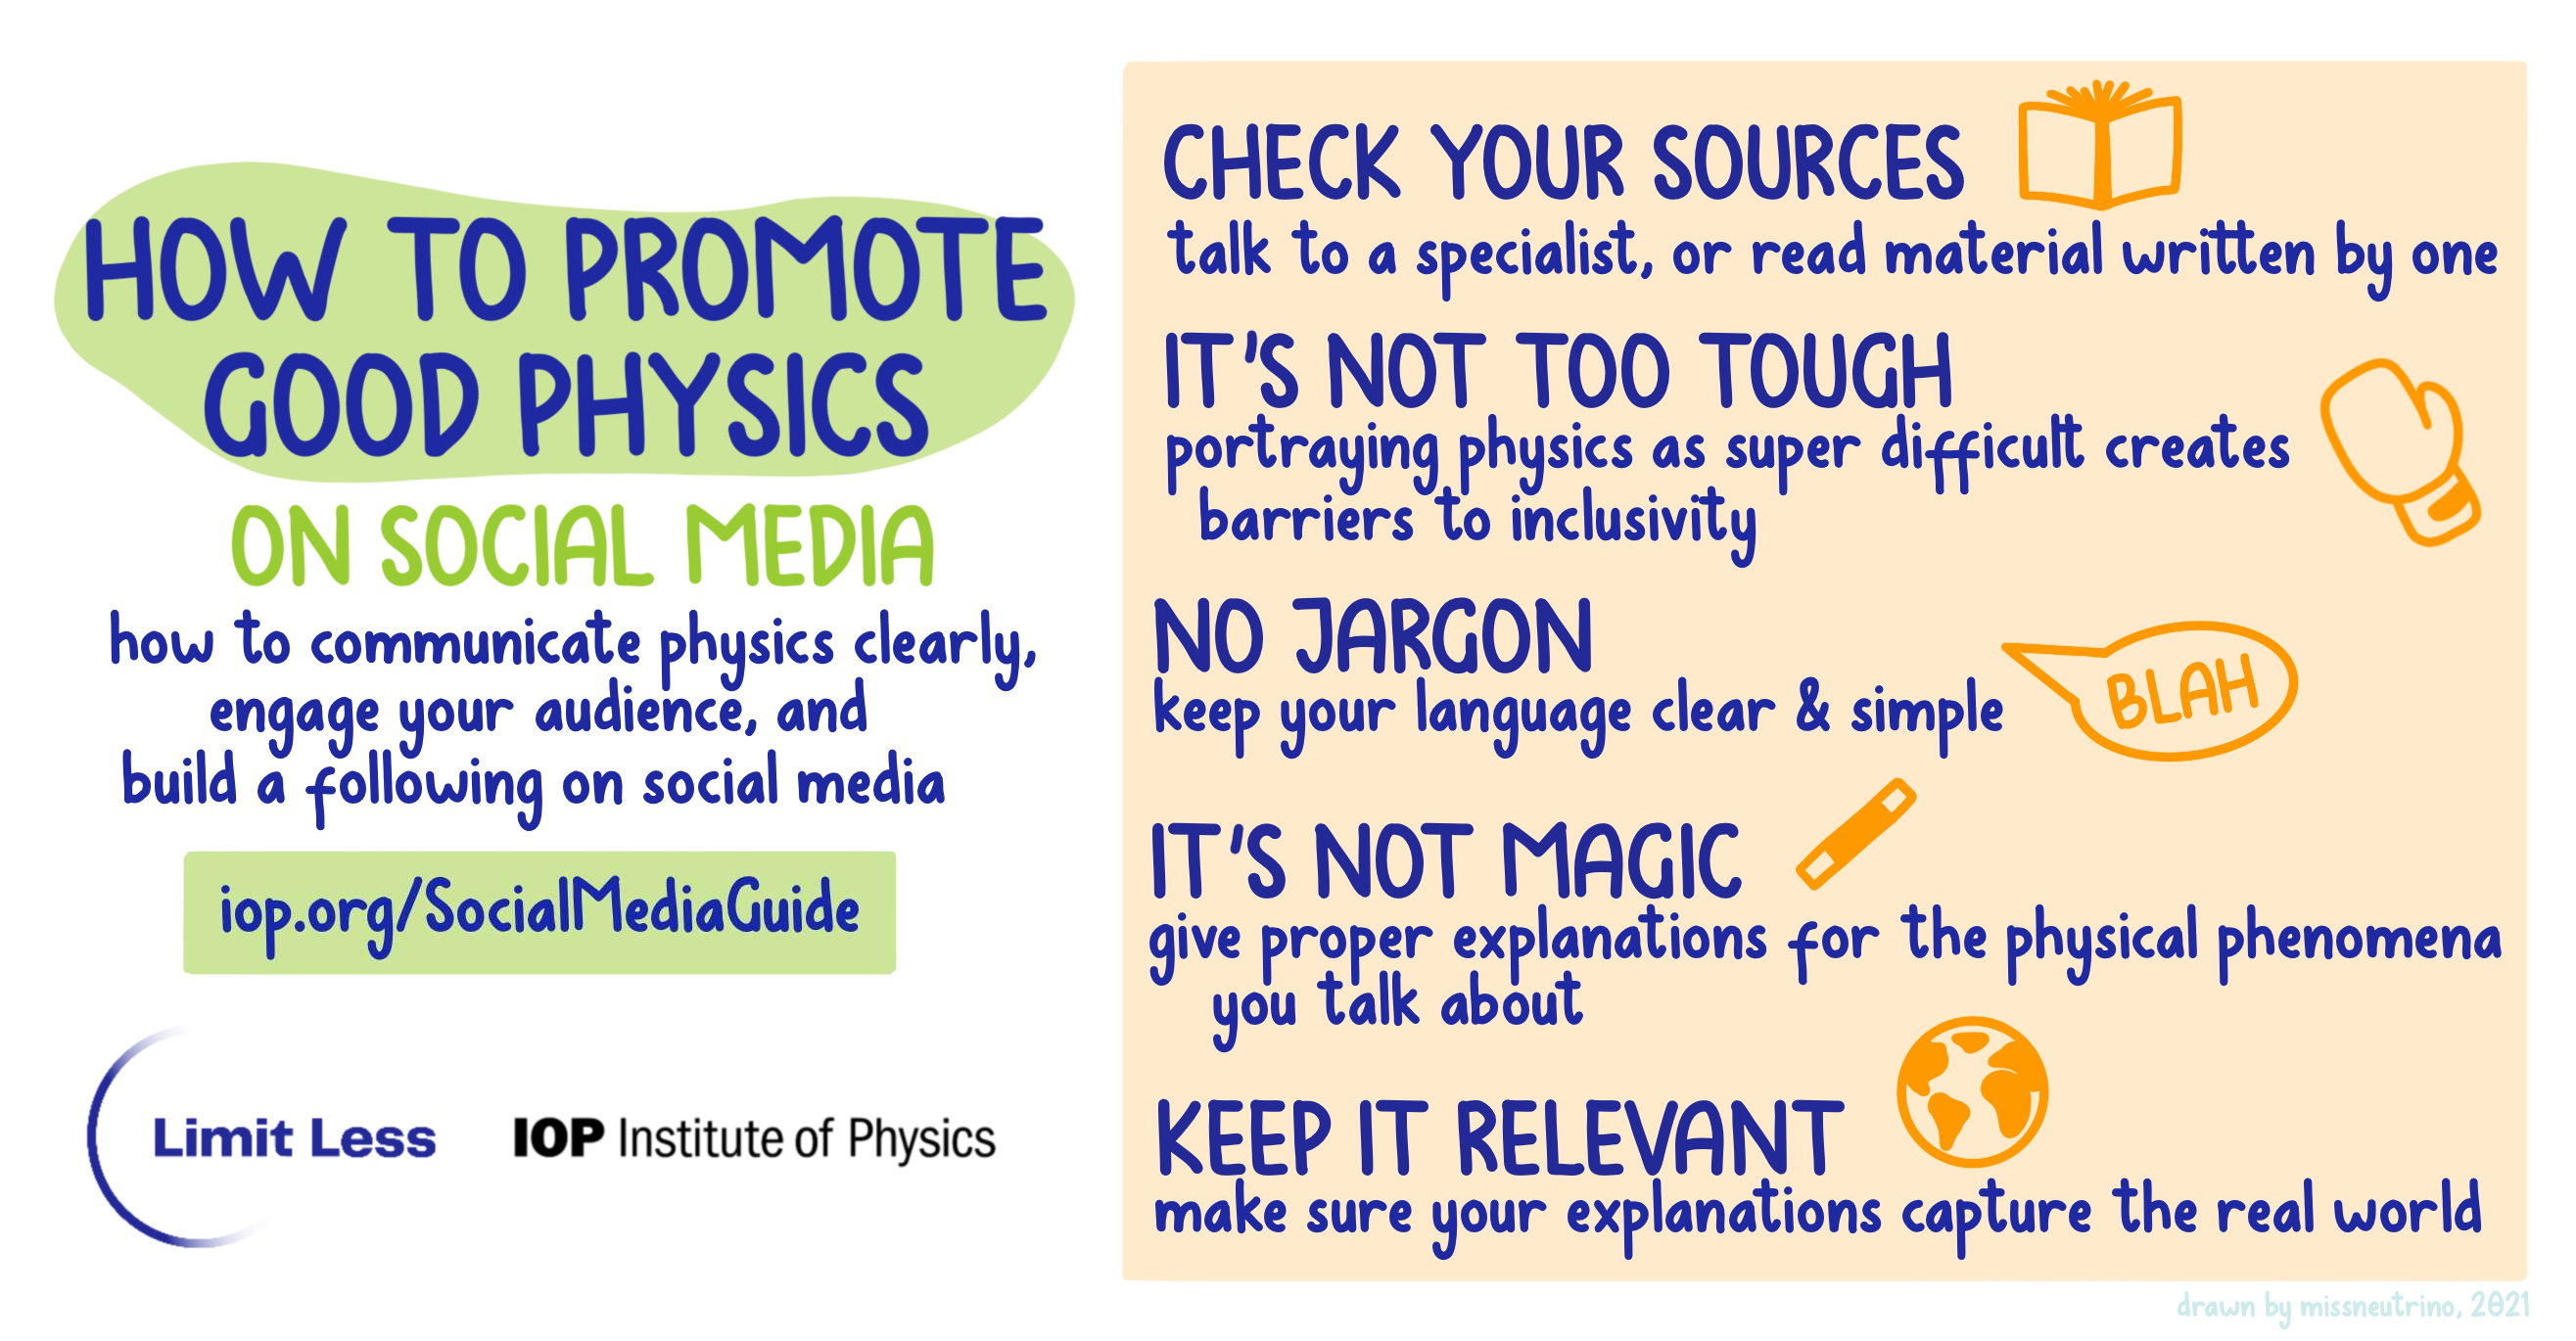 Image text reads: How to promote good physics on social media: How to communicate physics clearly, engage your audience, and build a following. Check your sources: talk to a specialist, or read material written by one. It’s not too tough: Portraying physics as super difficult creates barriers to inclusivity. No jargon: Keep your language clear and simple. It’s not magic: Give proper explanations for the physical phenomena you talk about. Keep it relevant: Make sure your explanations capture the real world.